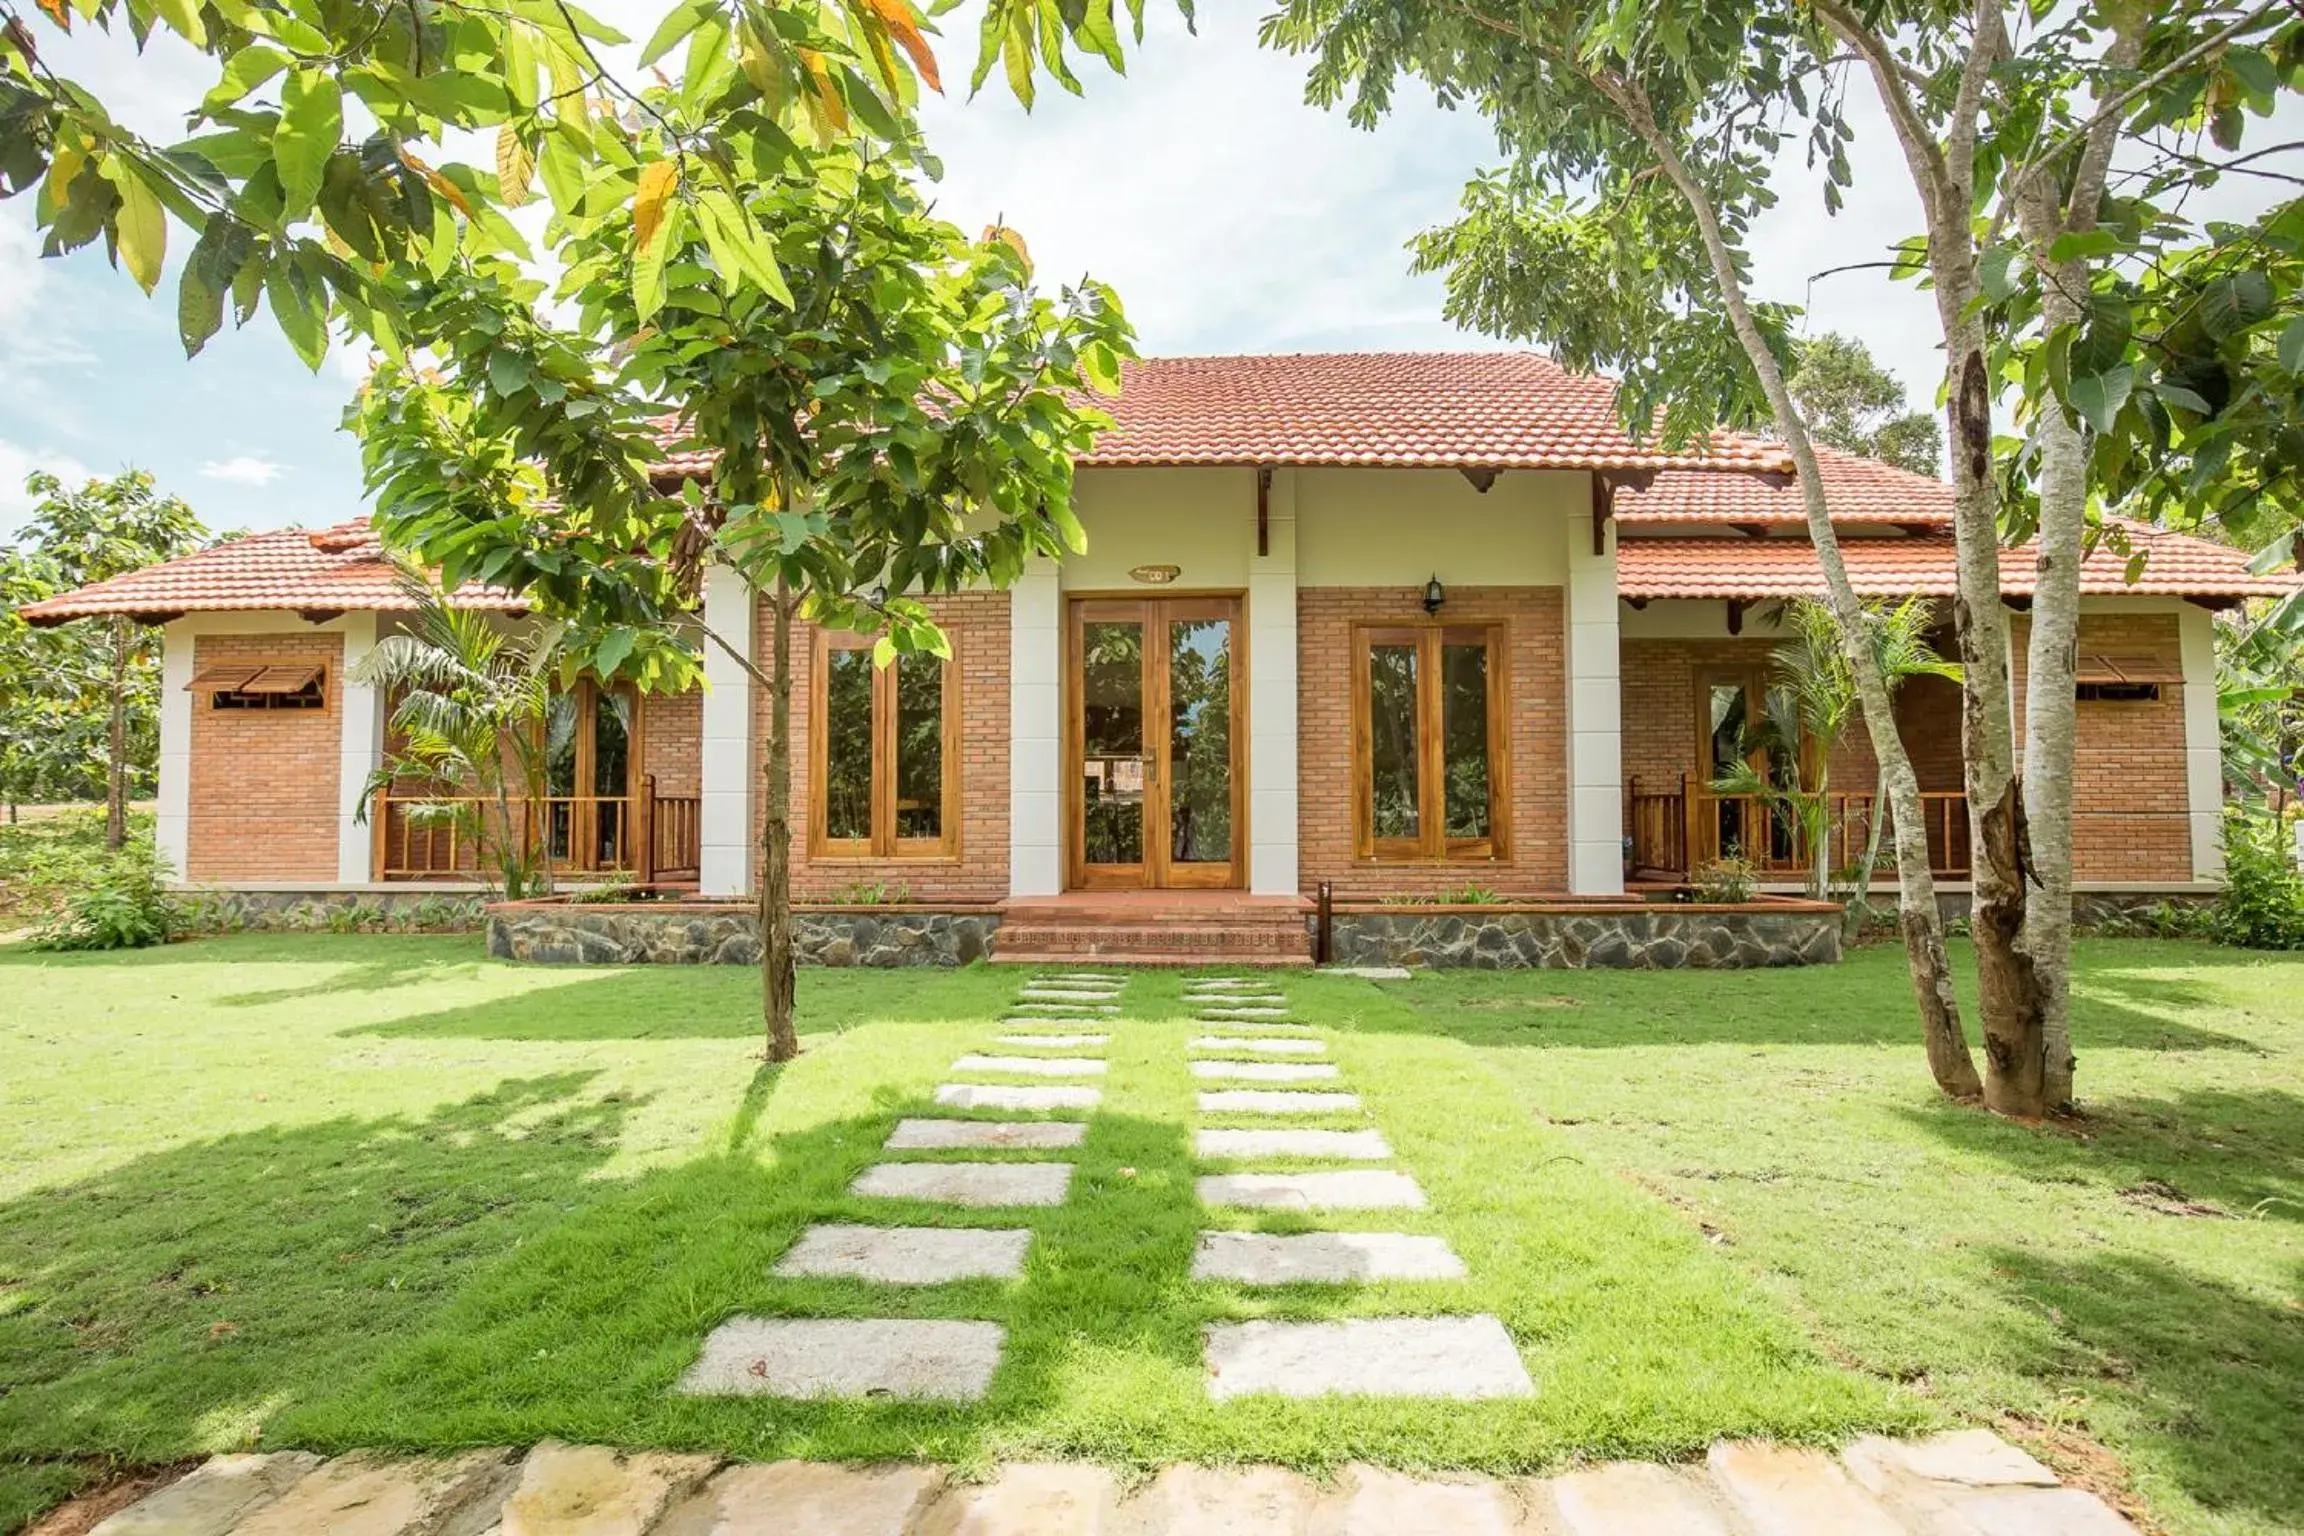 Patio, Property Building in The Garden House Phu Quoc Resort